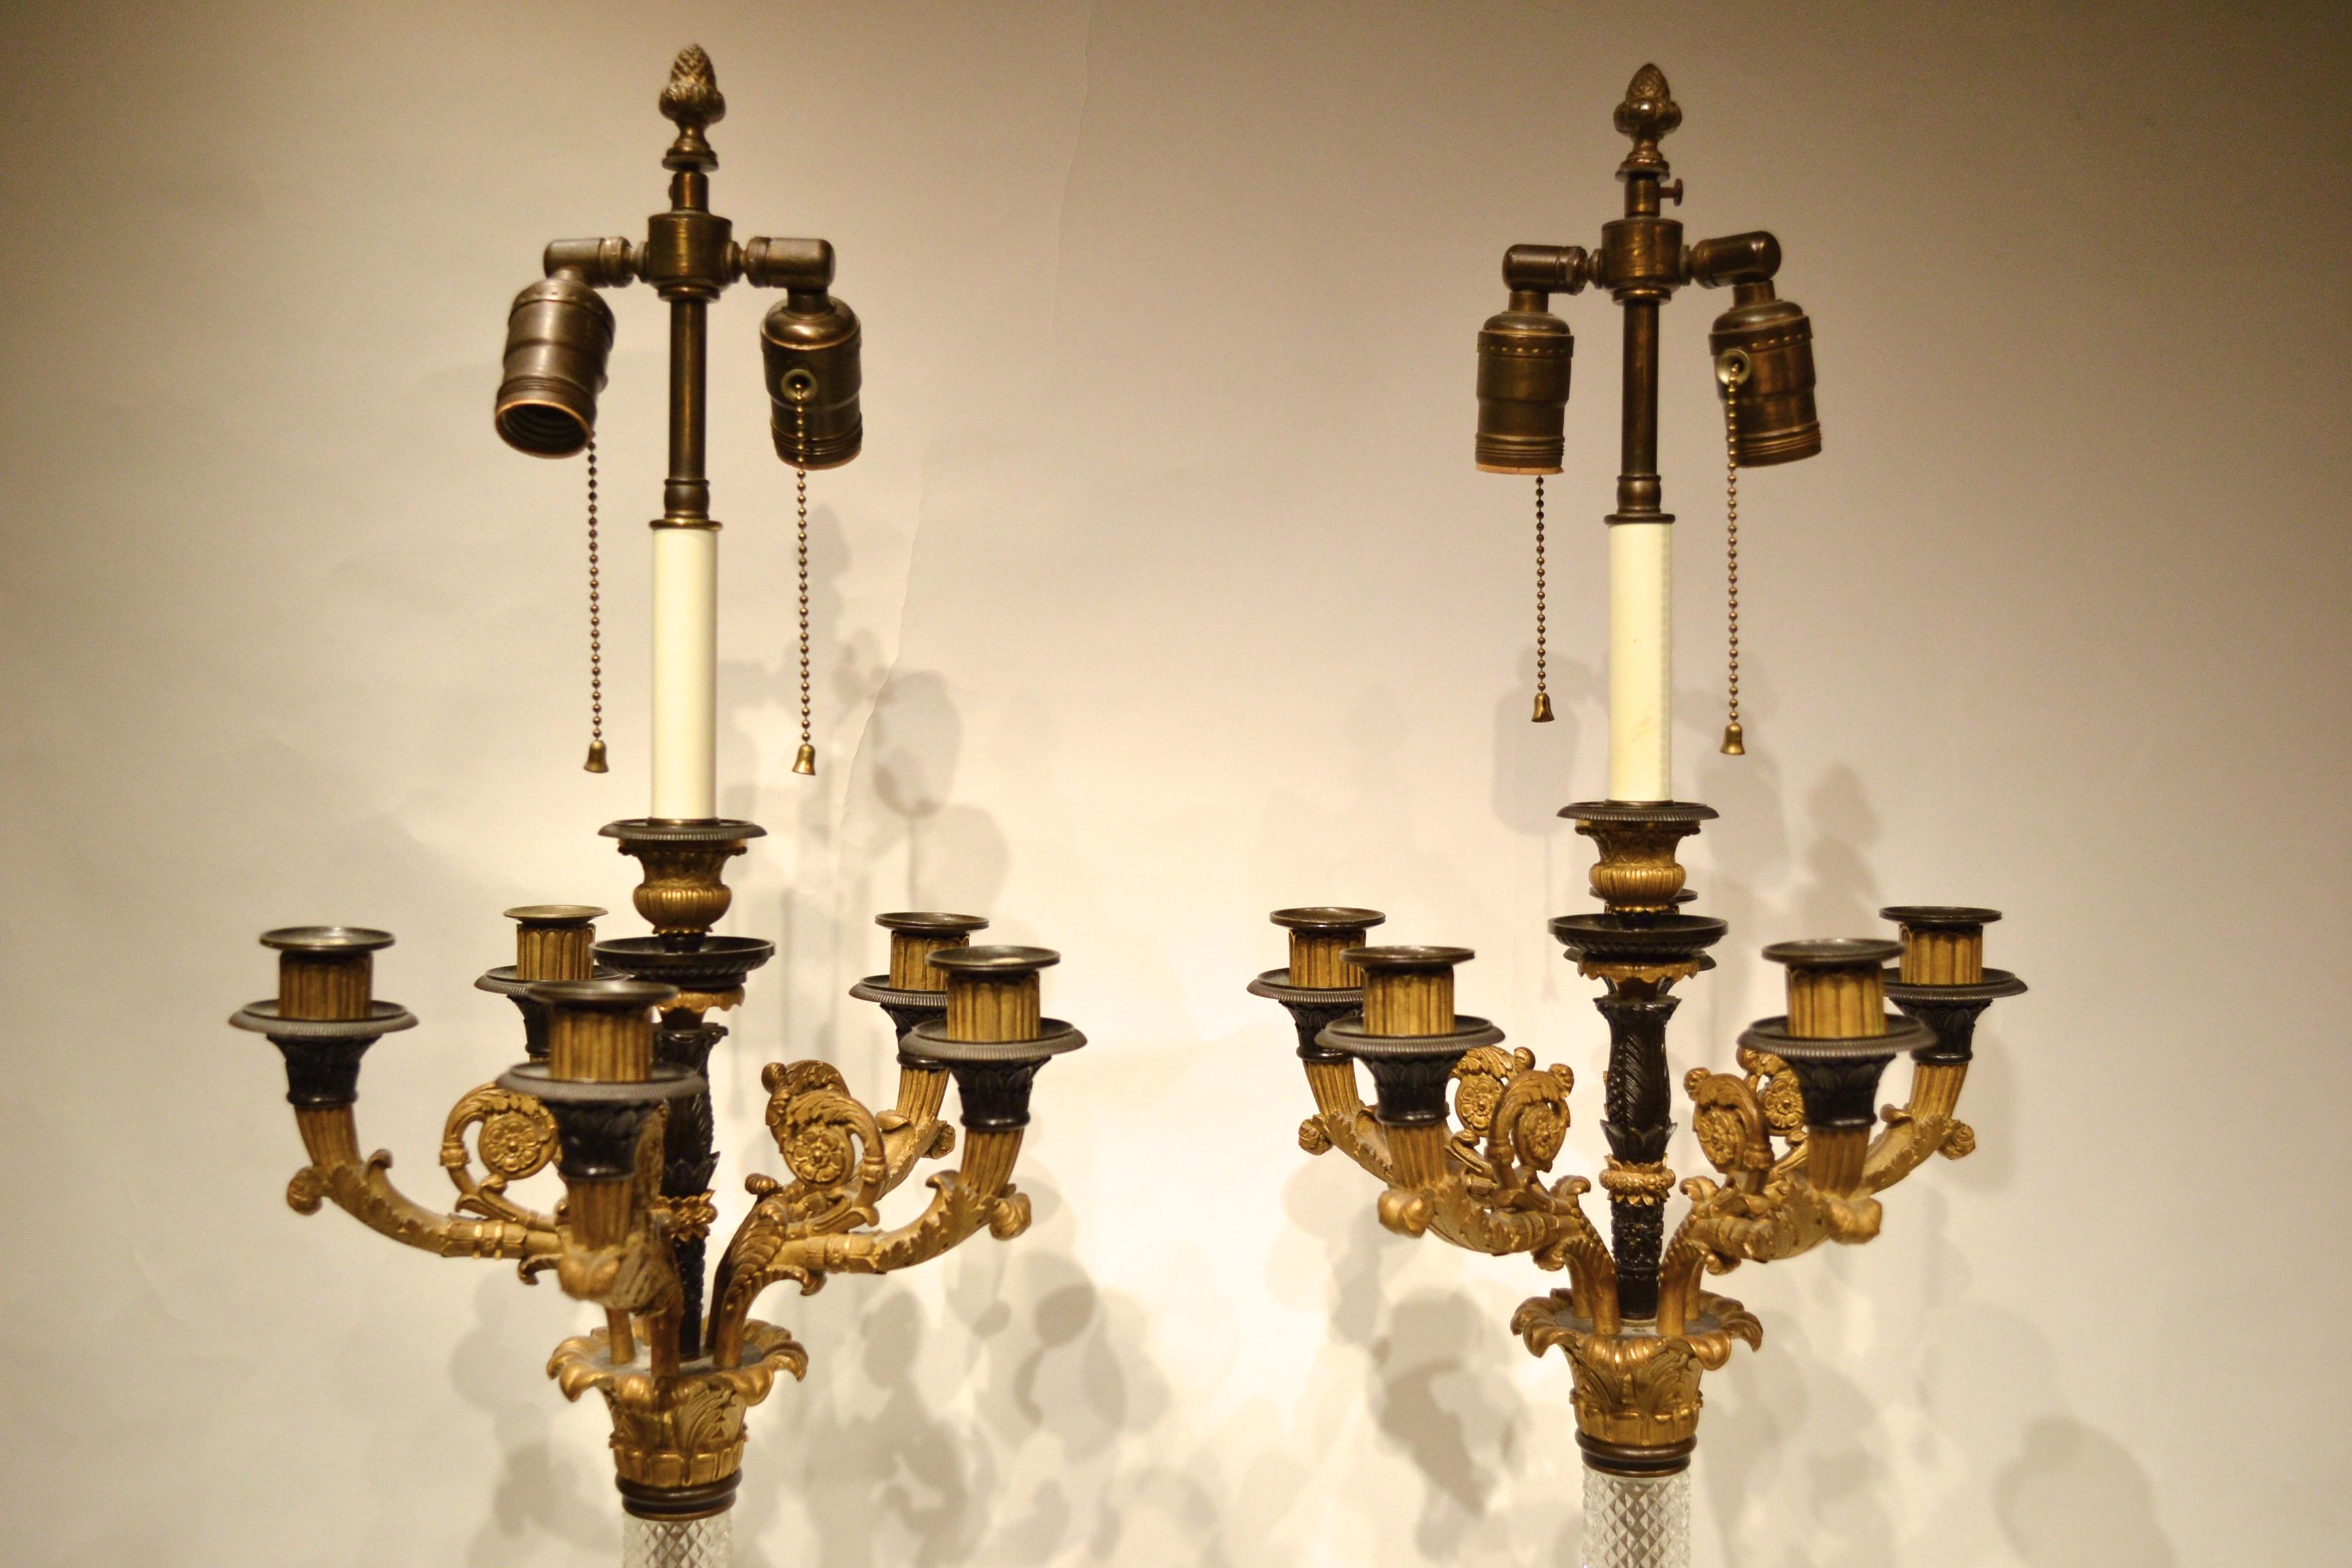 Gilt Pair of French 19th Century Empire Cut Glass and Bronze Candelabras / Lamps For Sale